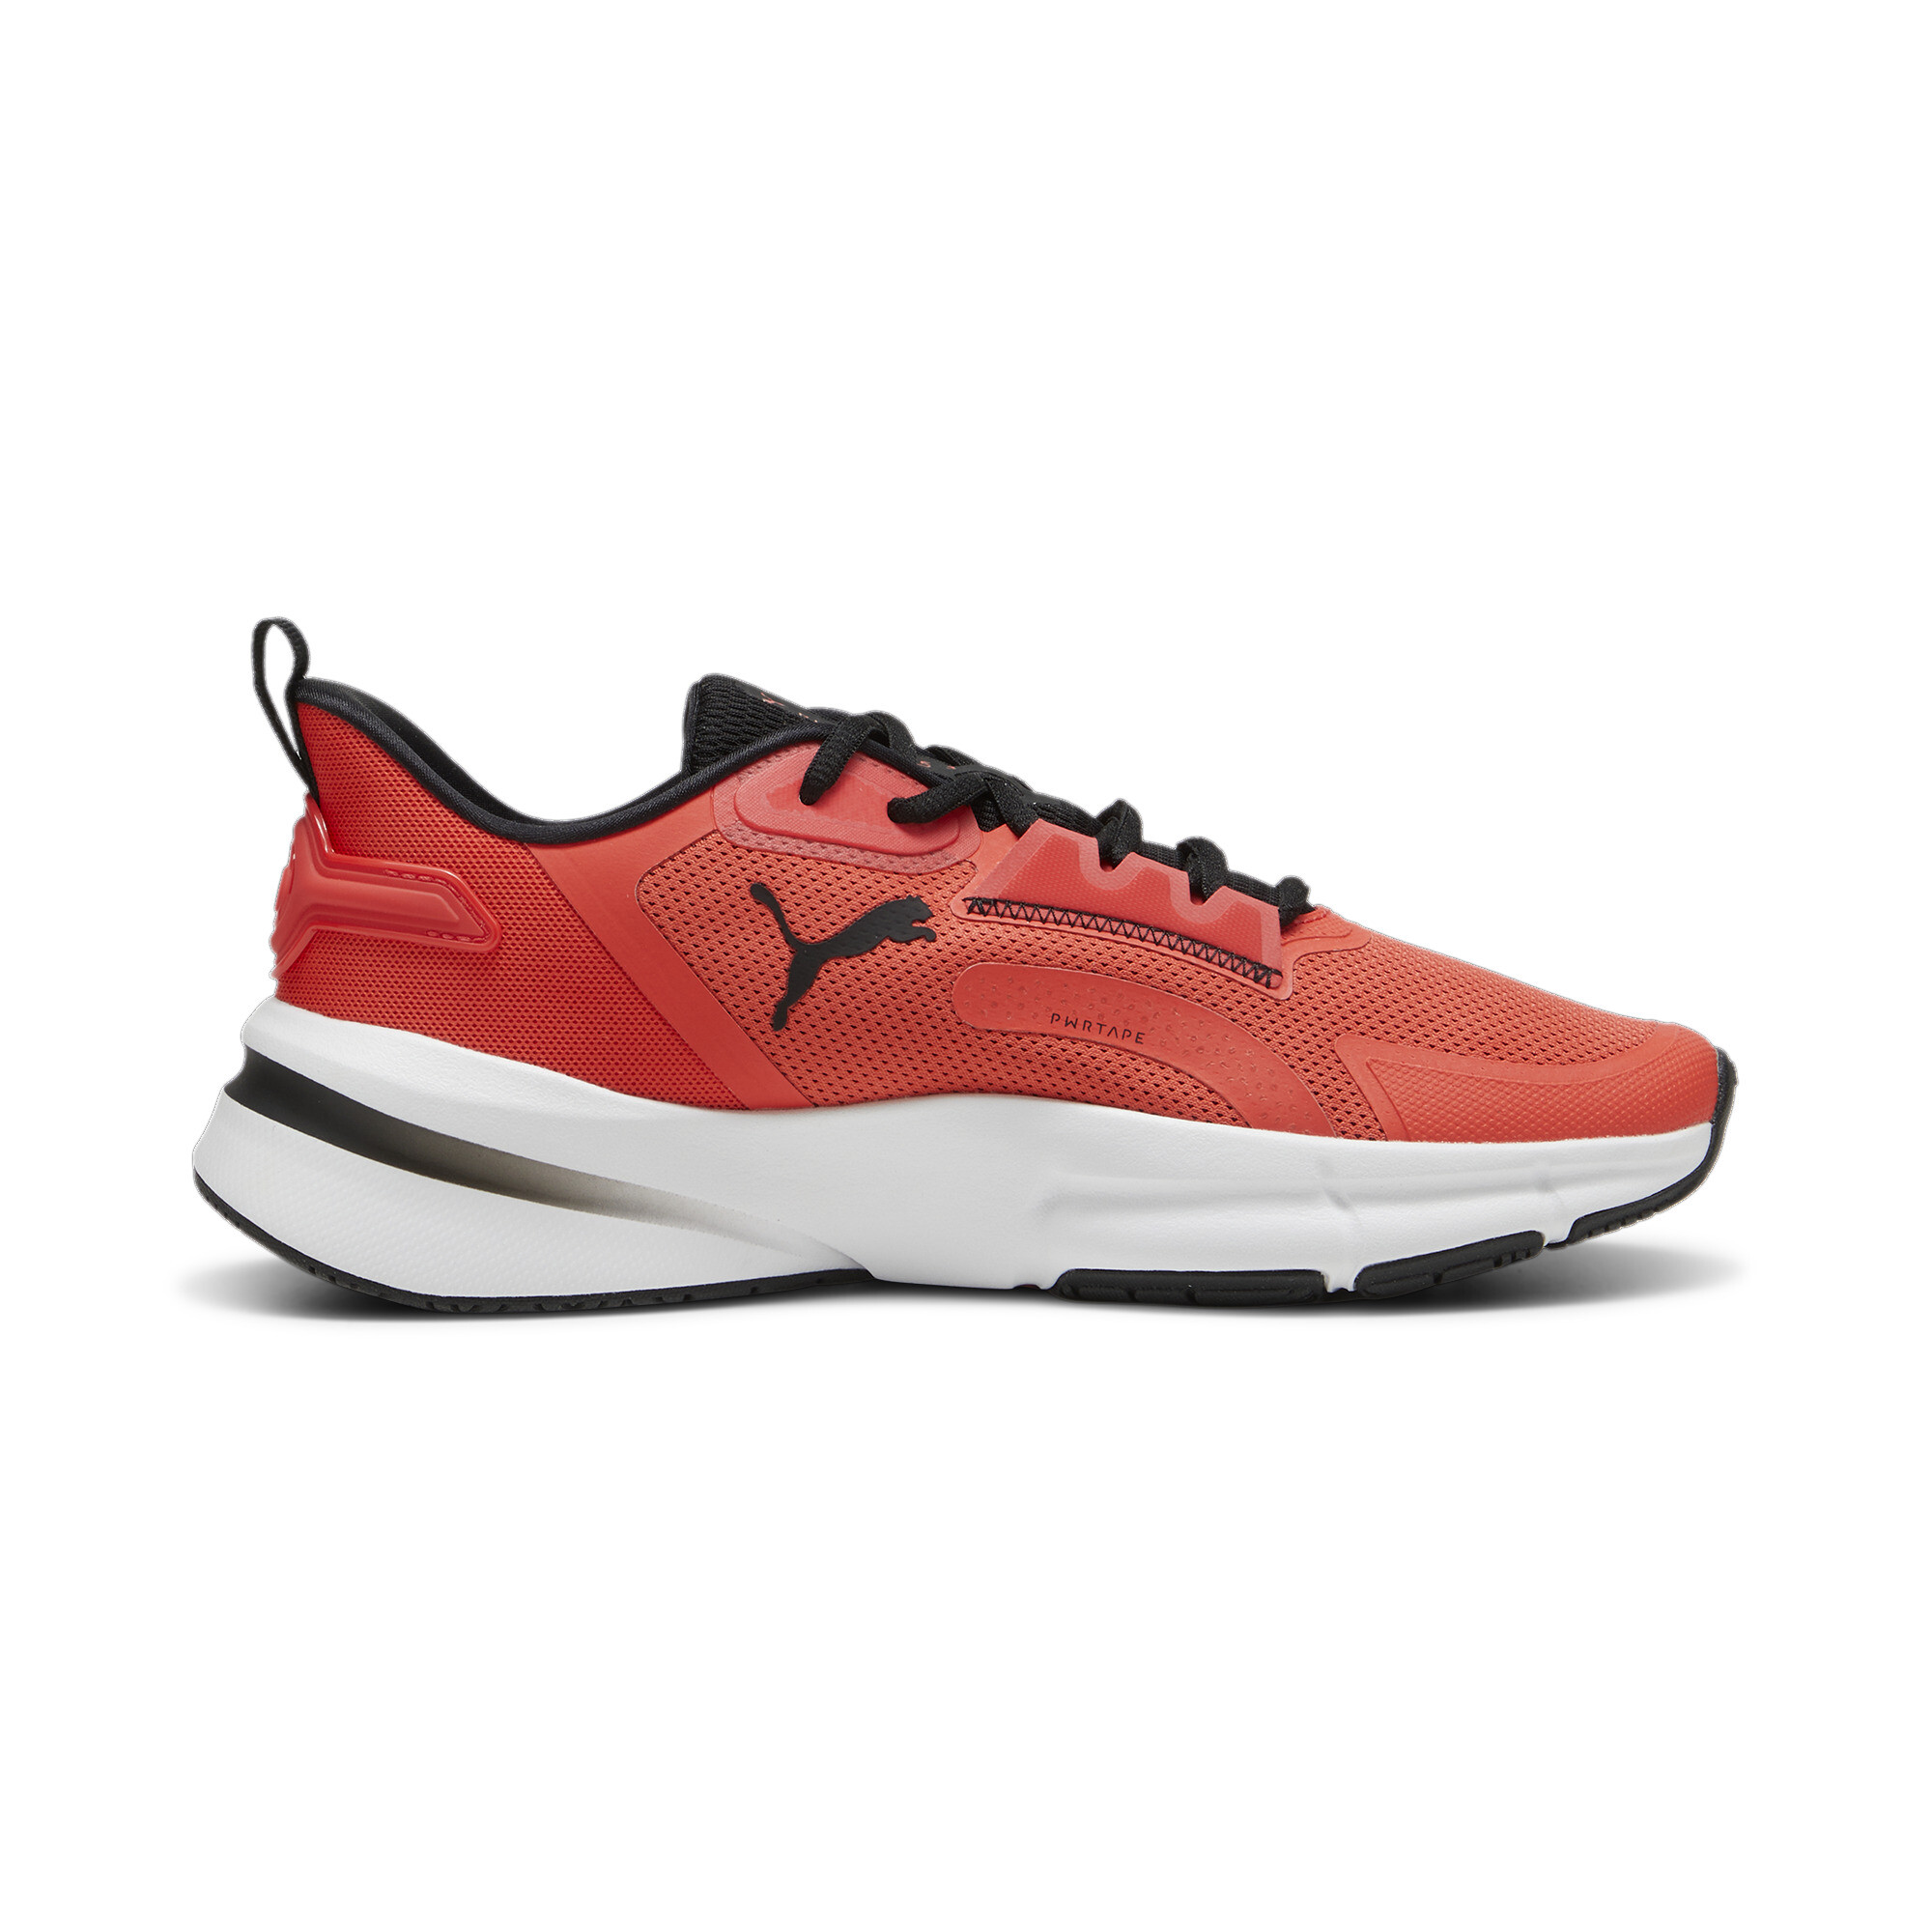 Men's PUMA PWRFrame TR 3 Training Shoes In Red, Size EU 40.5